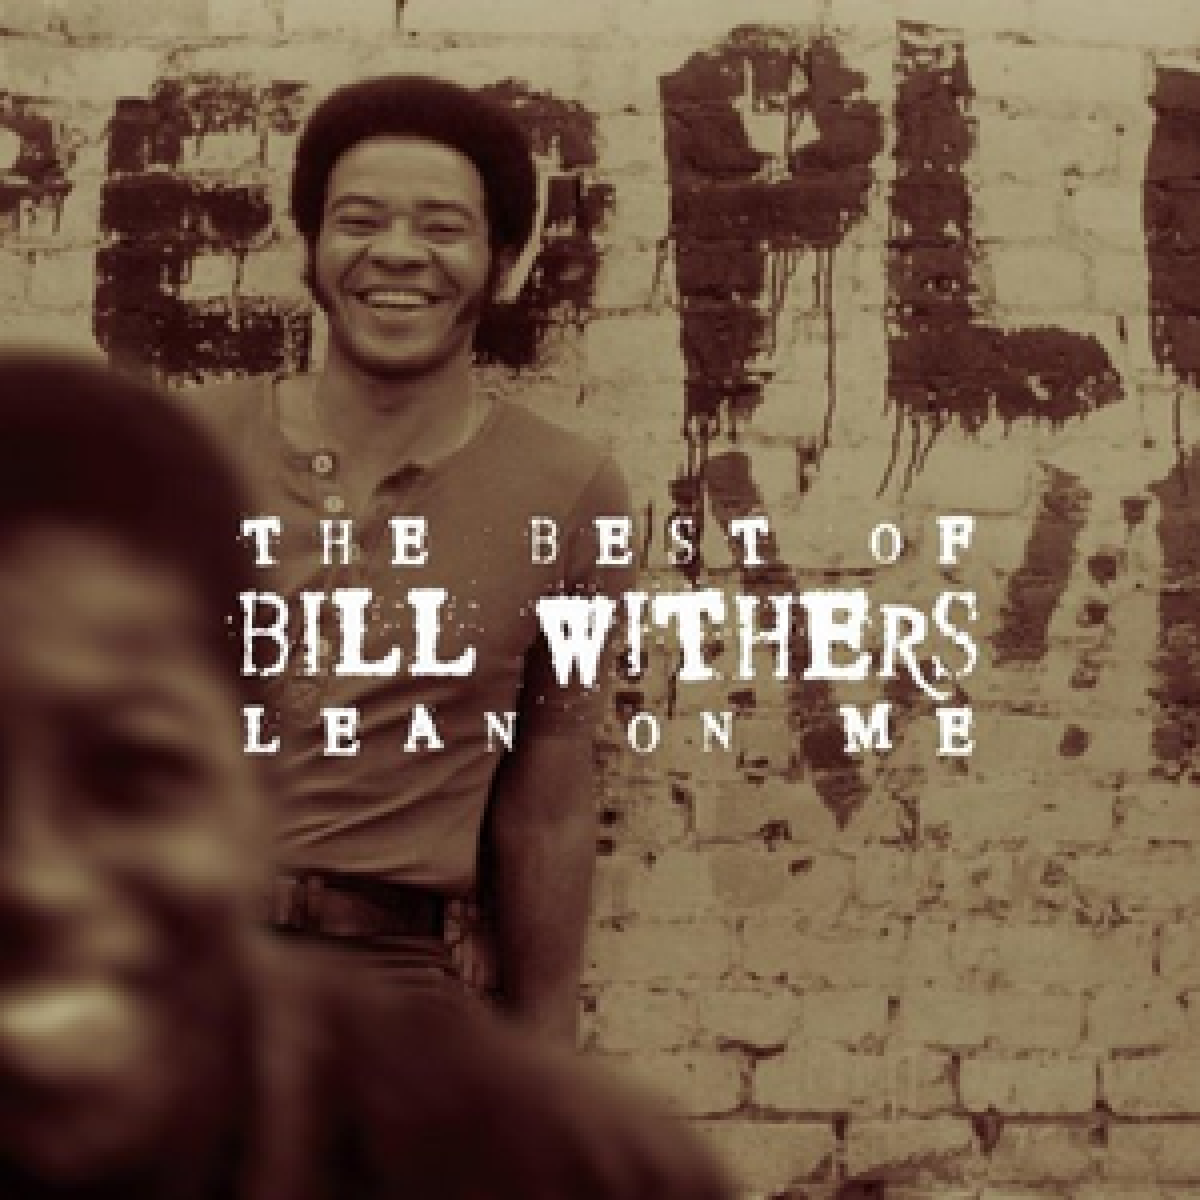 #NowPlaying Bill Withers - Ain't no sunshine https://t.co/G6TyccgF9d